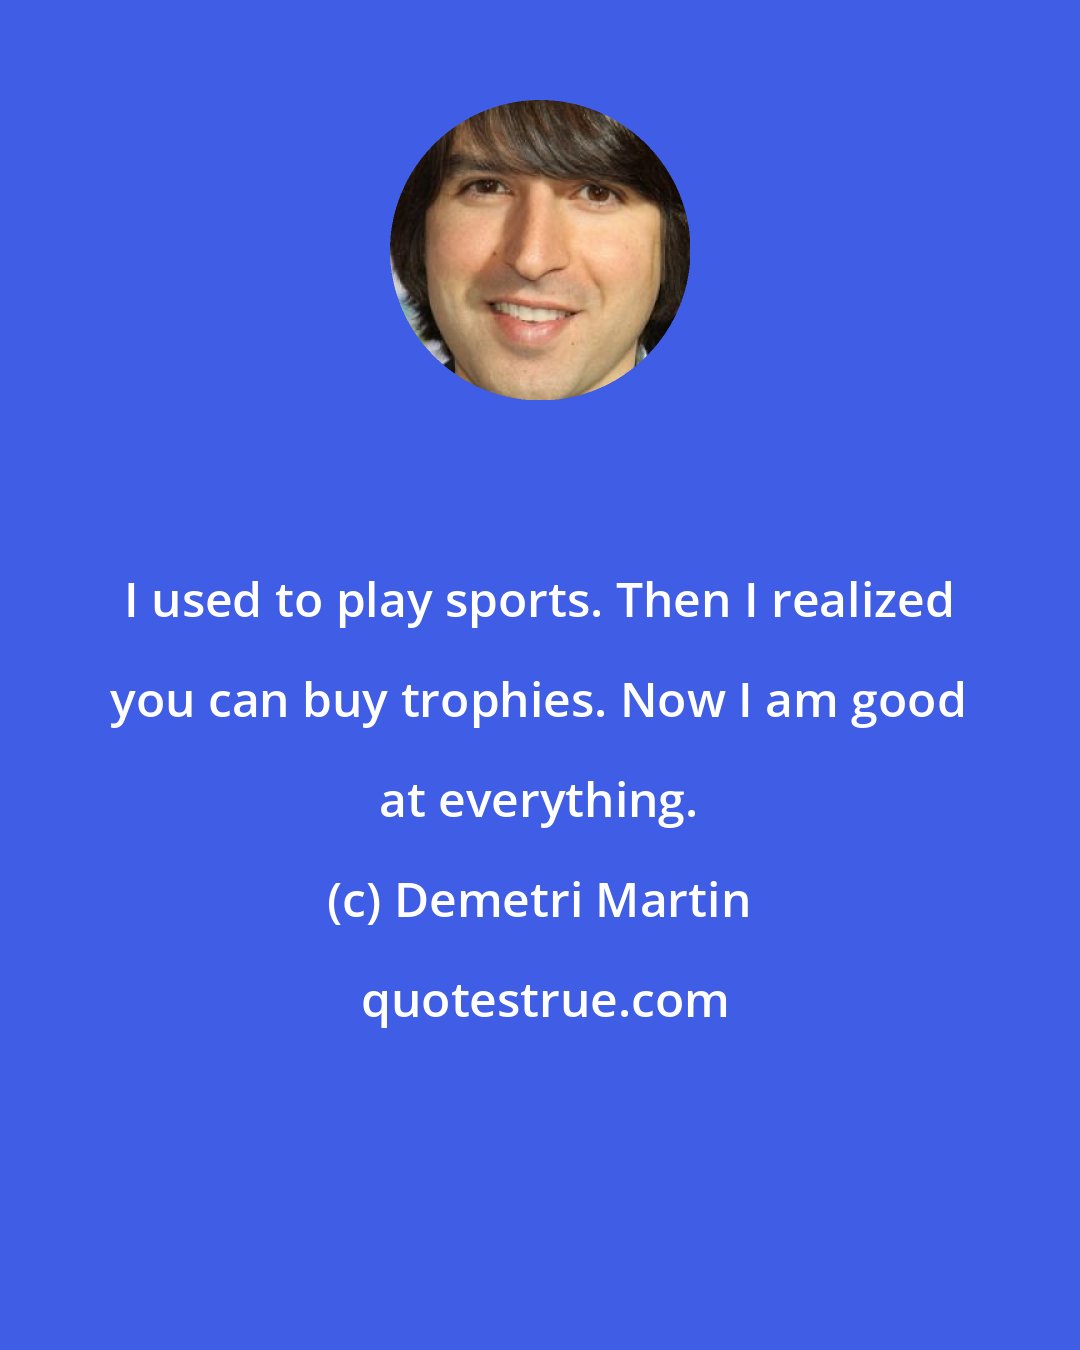 Demetri Martin: I used to play sports. Then I realized you can buy trophies. Now I am good at everything.